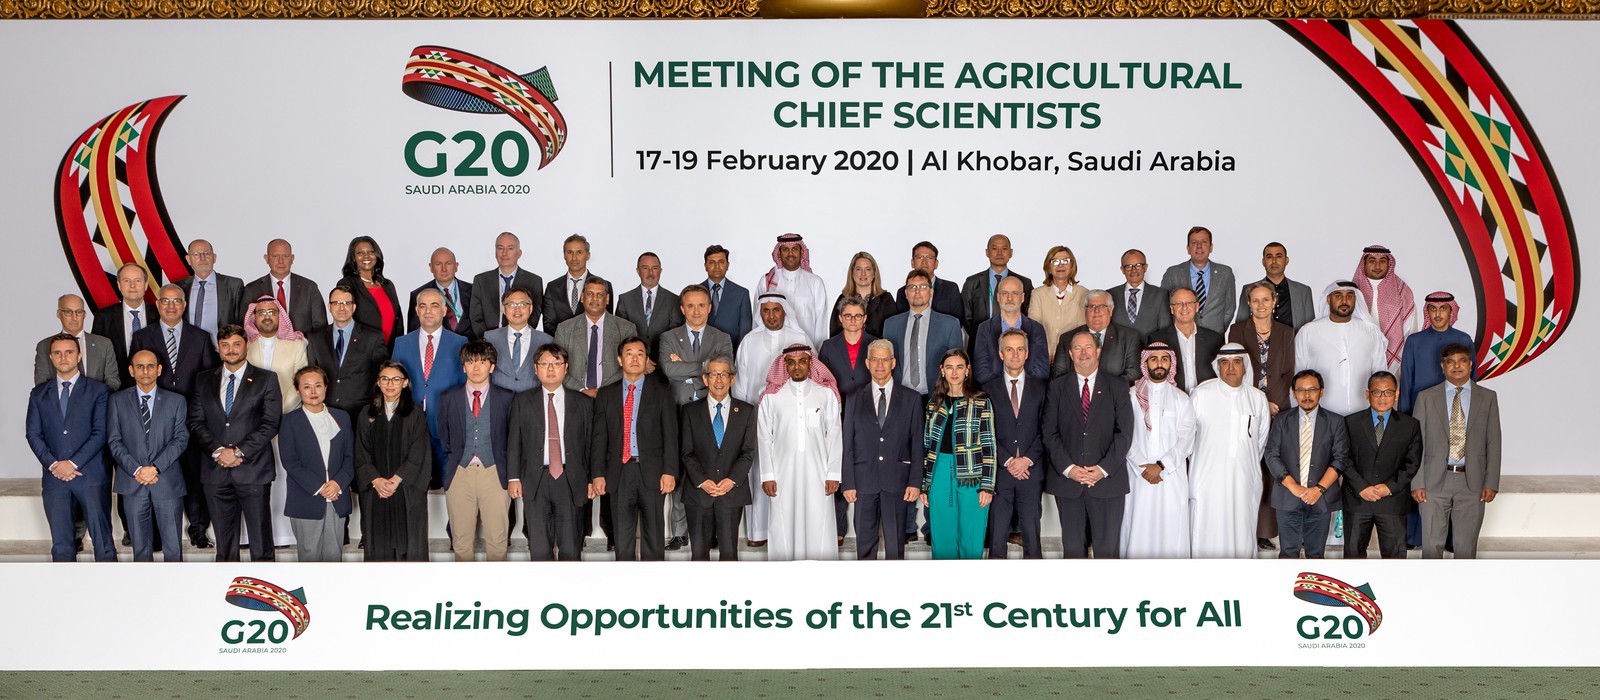 G20 Meeting of Agriculture Chief Scientists Reflects Trends in 2020 and